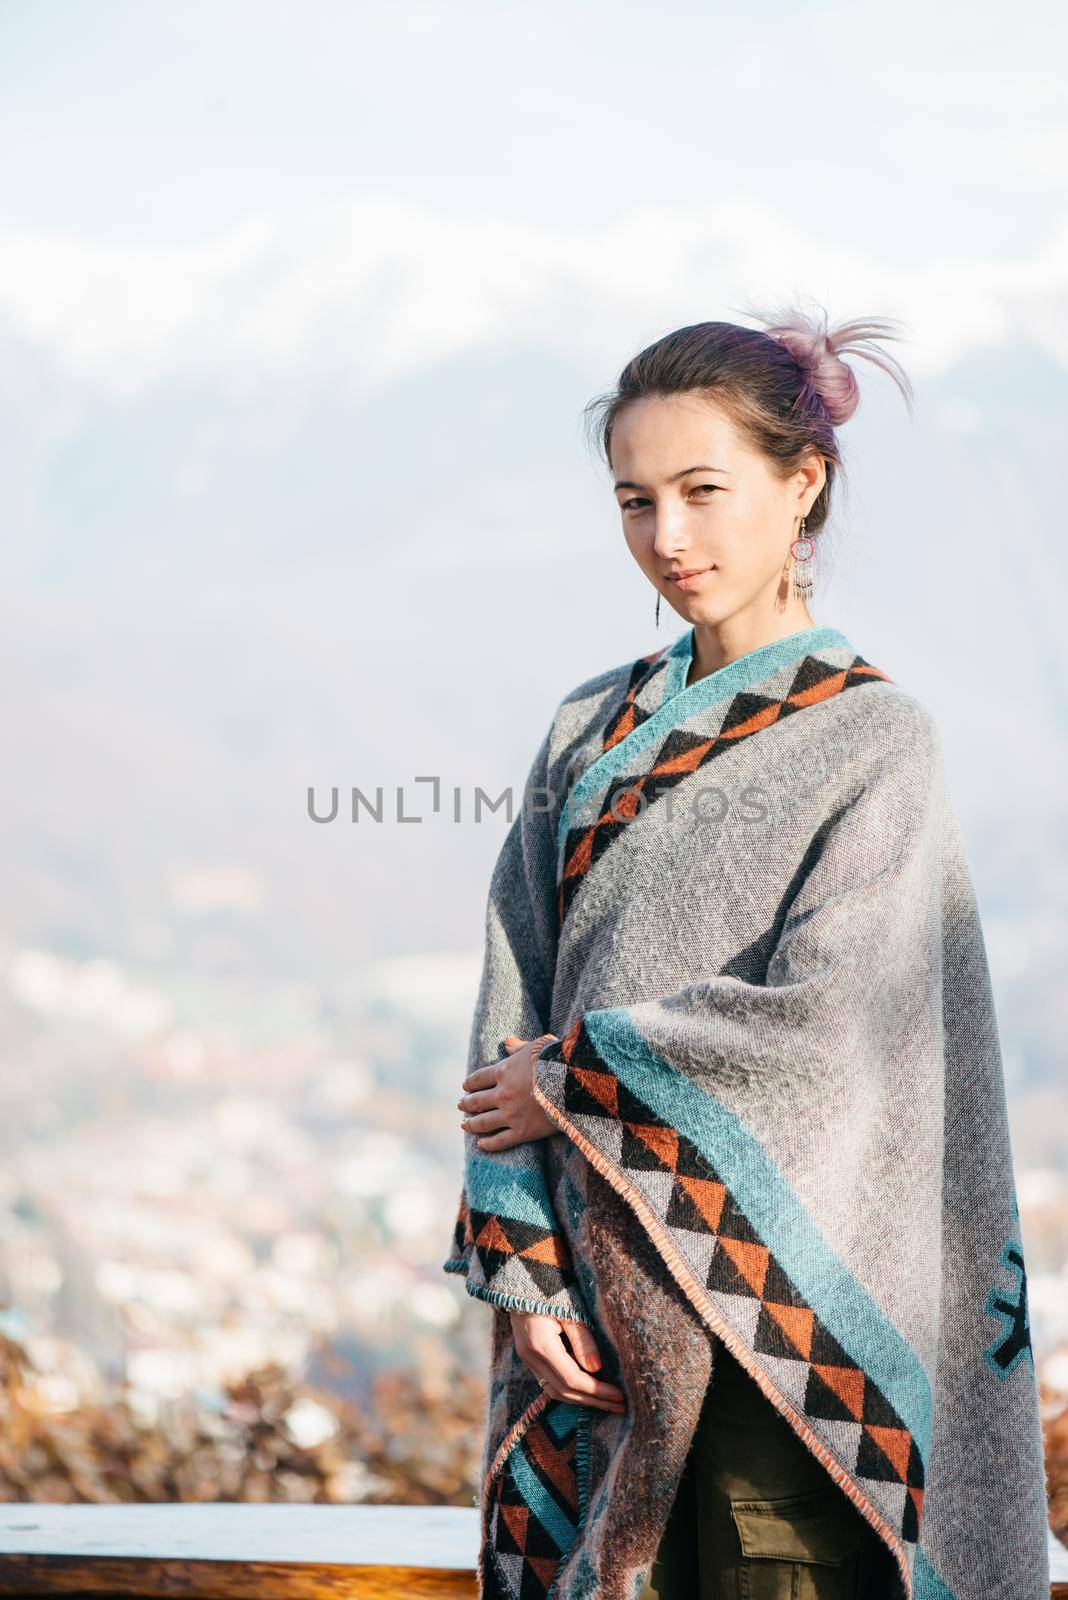 Beautiful young woman standing on background of snowy mountains, looking at camera.